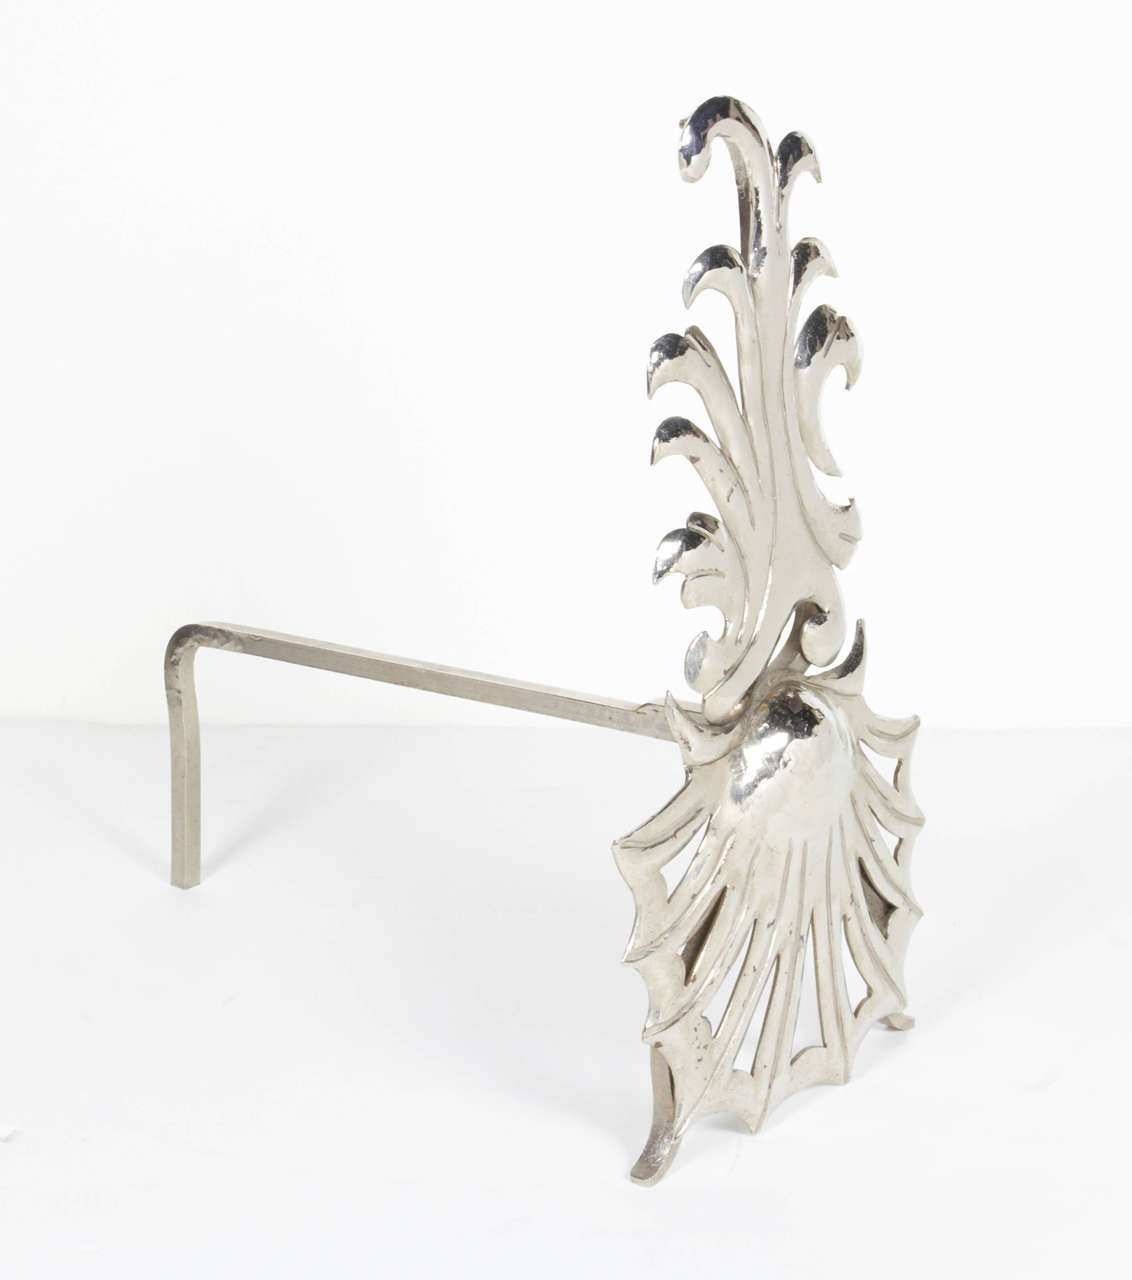 Art Deco Coastal Andirons in Hammered Nickel Plated Iron, c. 1980's In Excellent Condition For Sale In Fort Lauderdale, FL